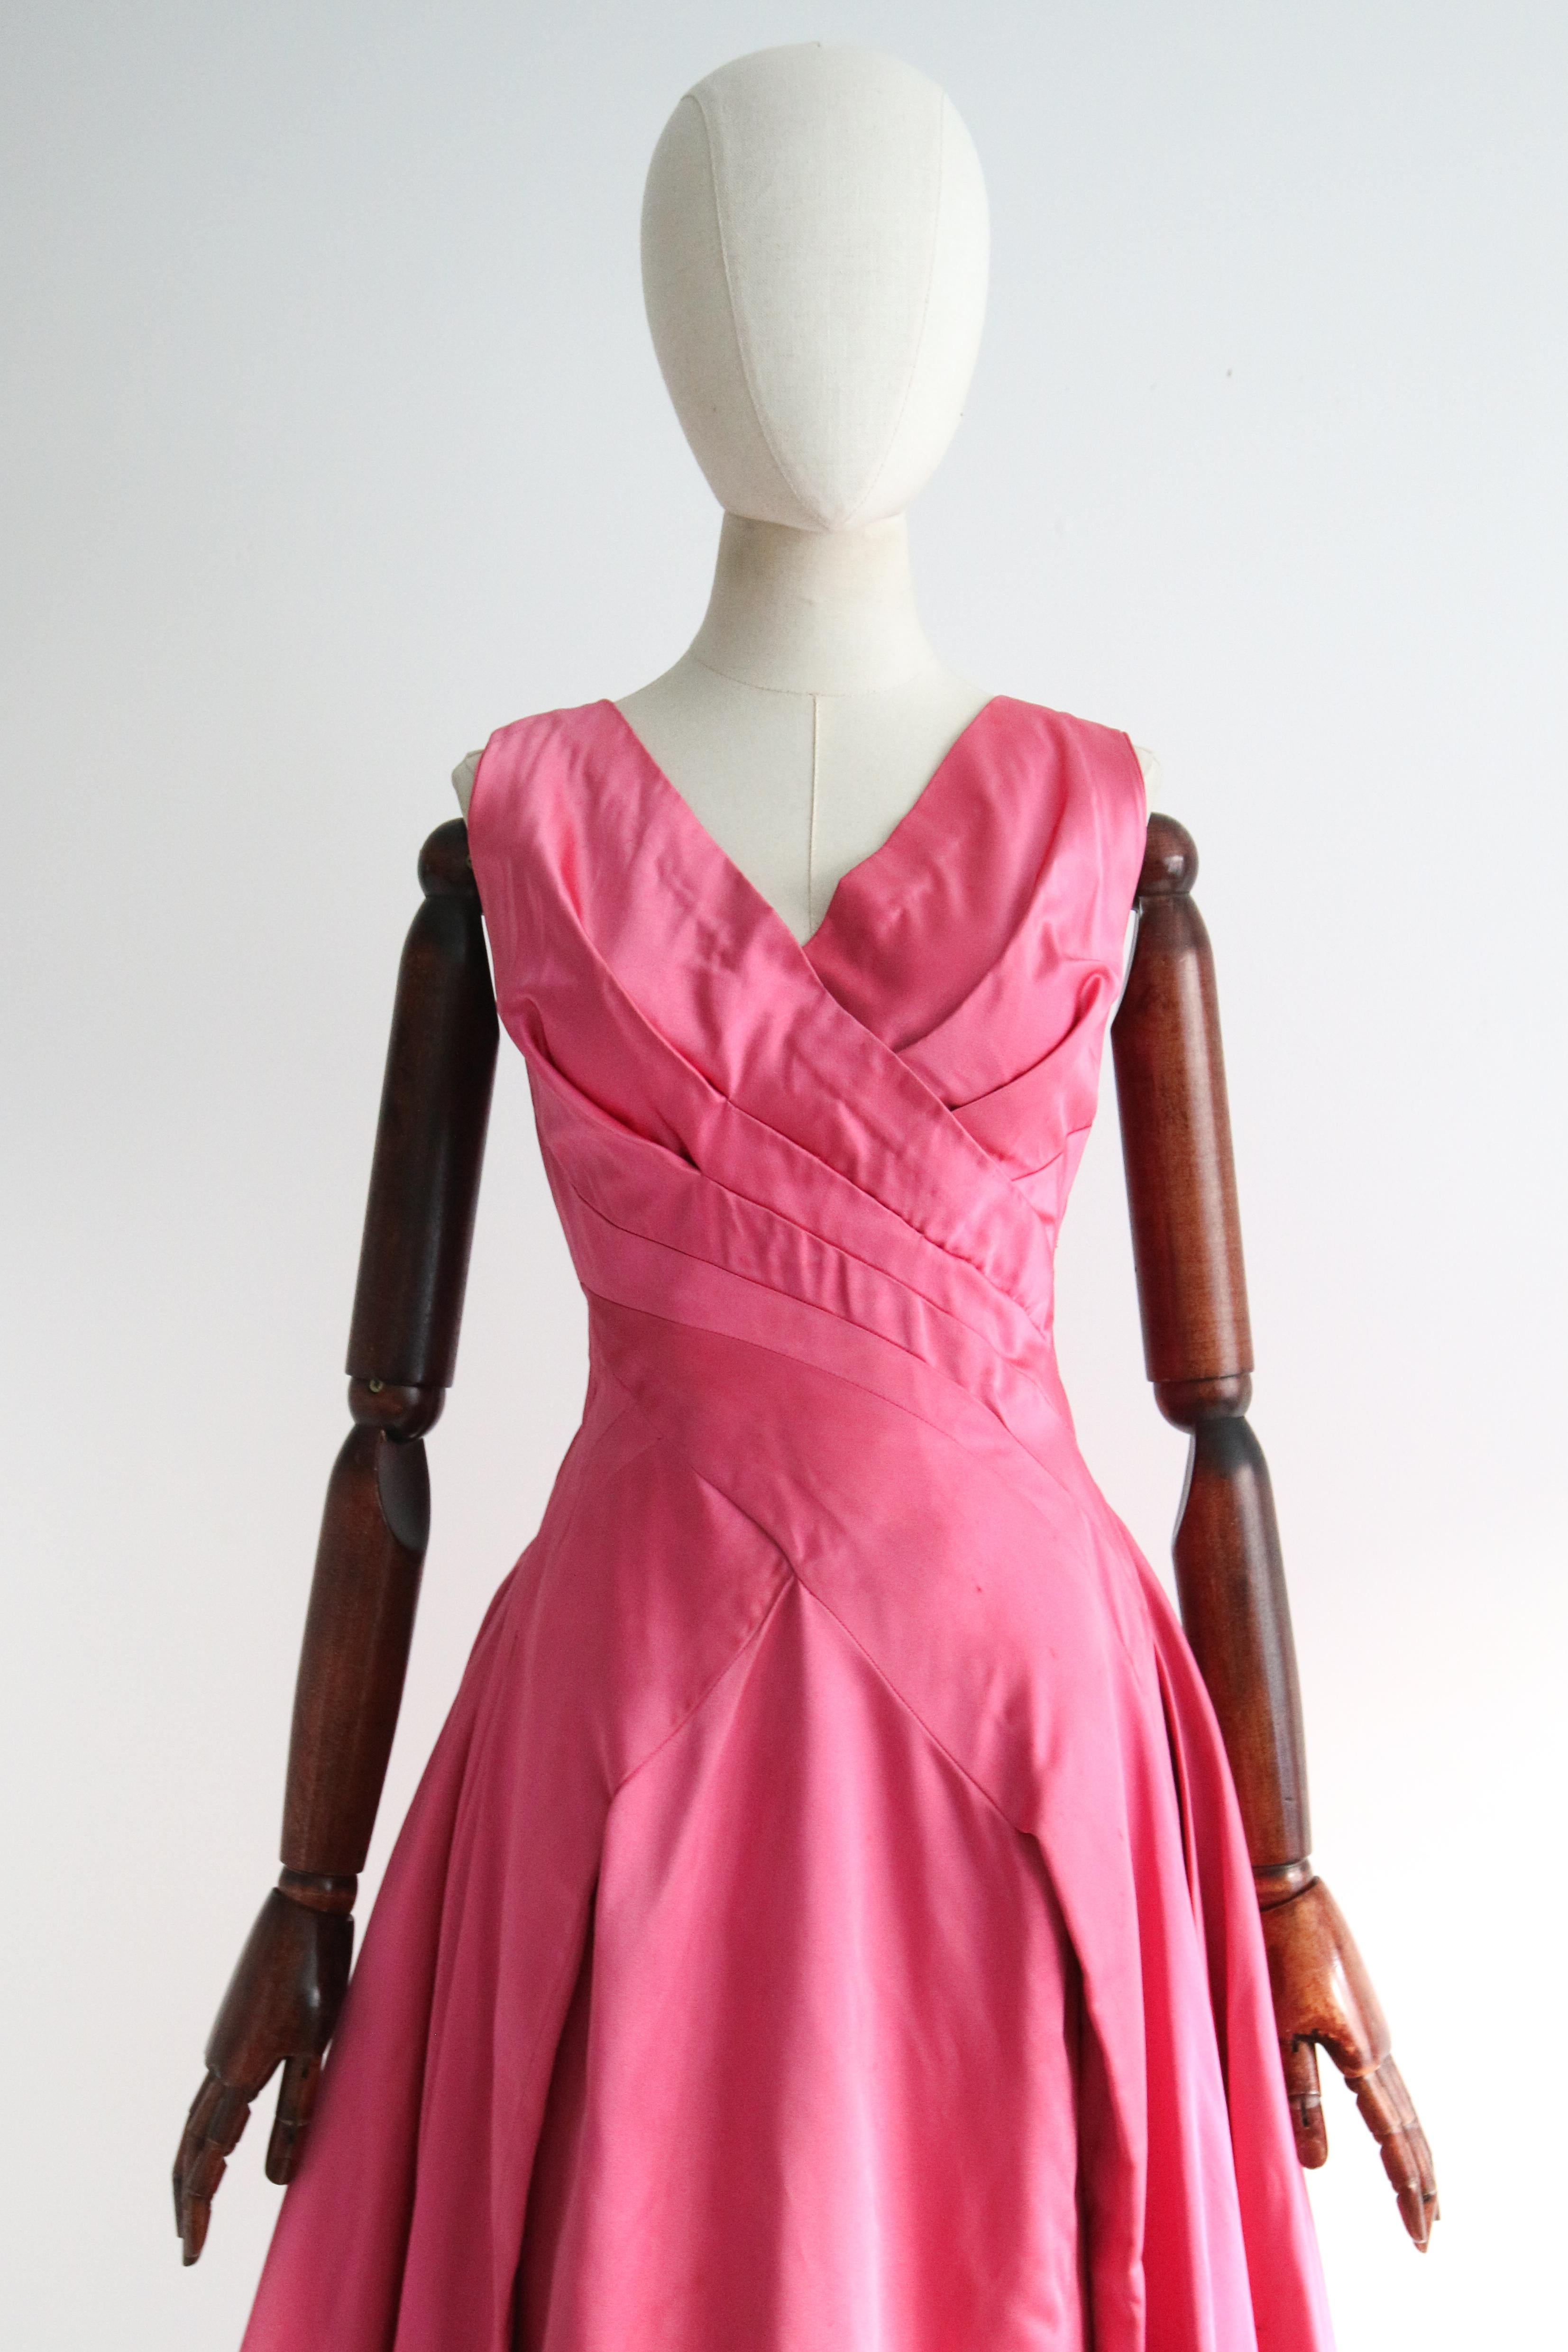 A true beauty to behold. This original 1950's duchess satin dress, rendered in a soft shade of sweet pink and accented by the most divine pleat work, is a timeless beauty to behold and a must have in your vintage collection. 

The V shaped cross